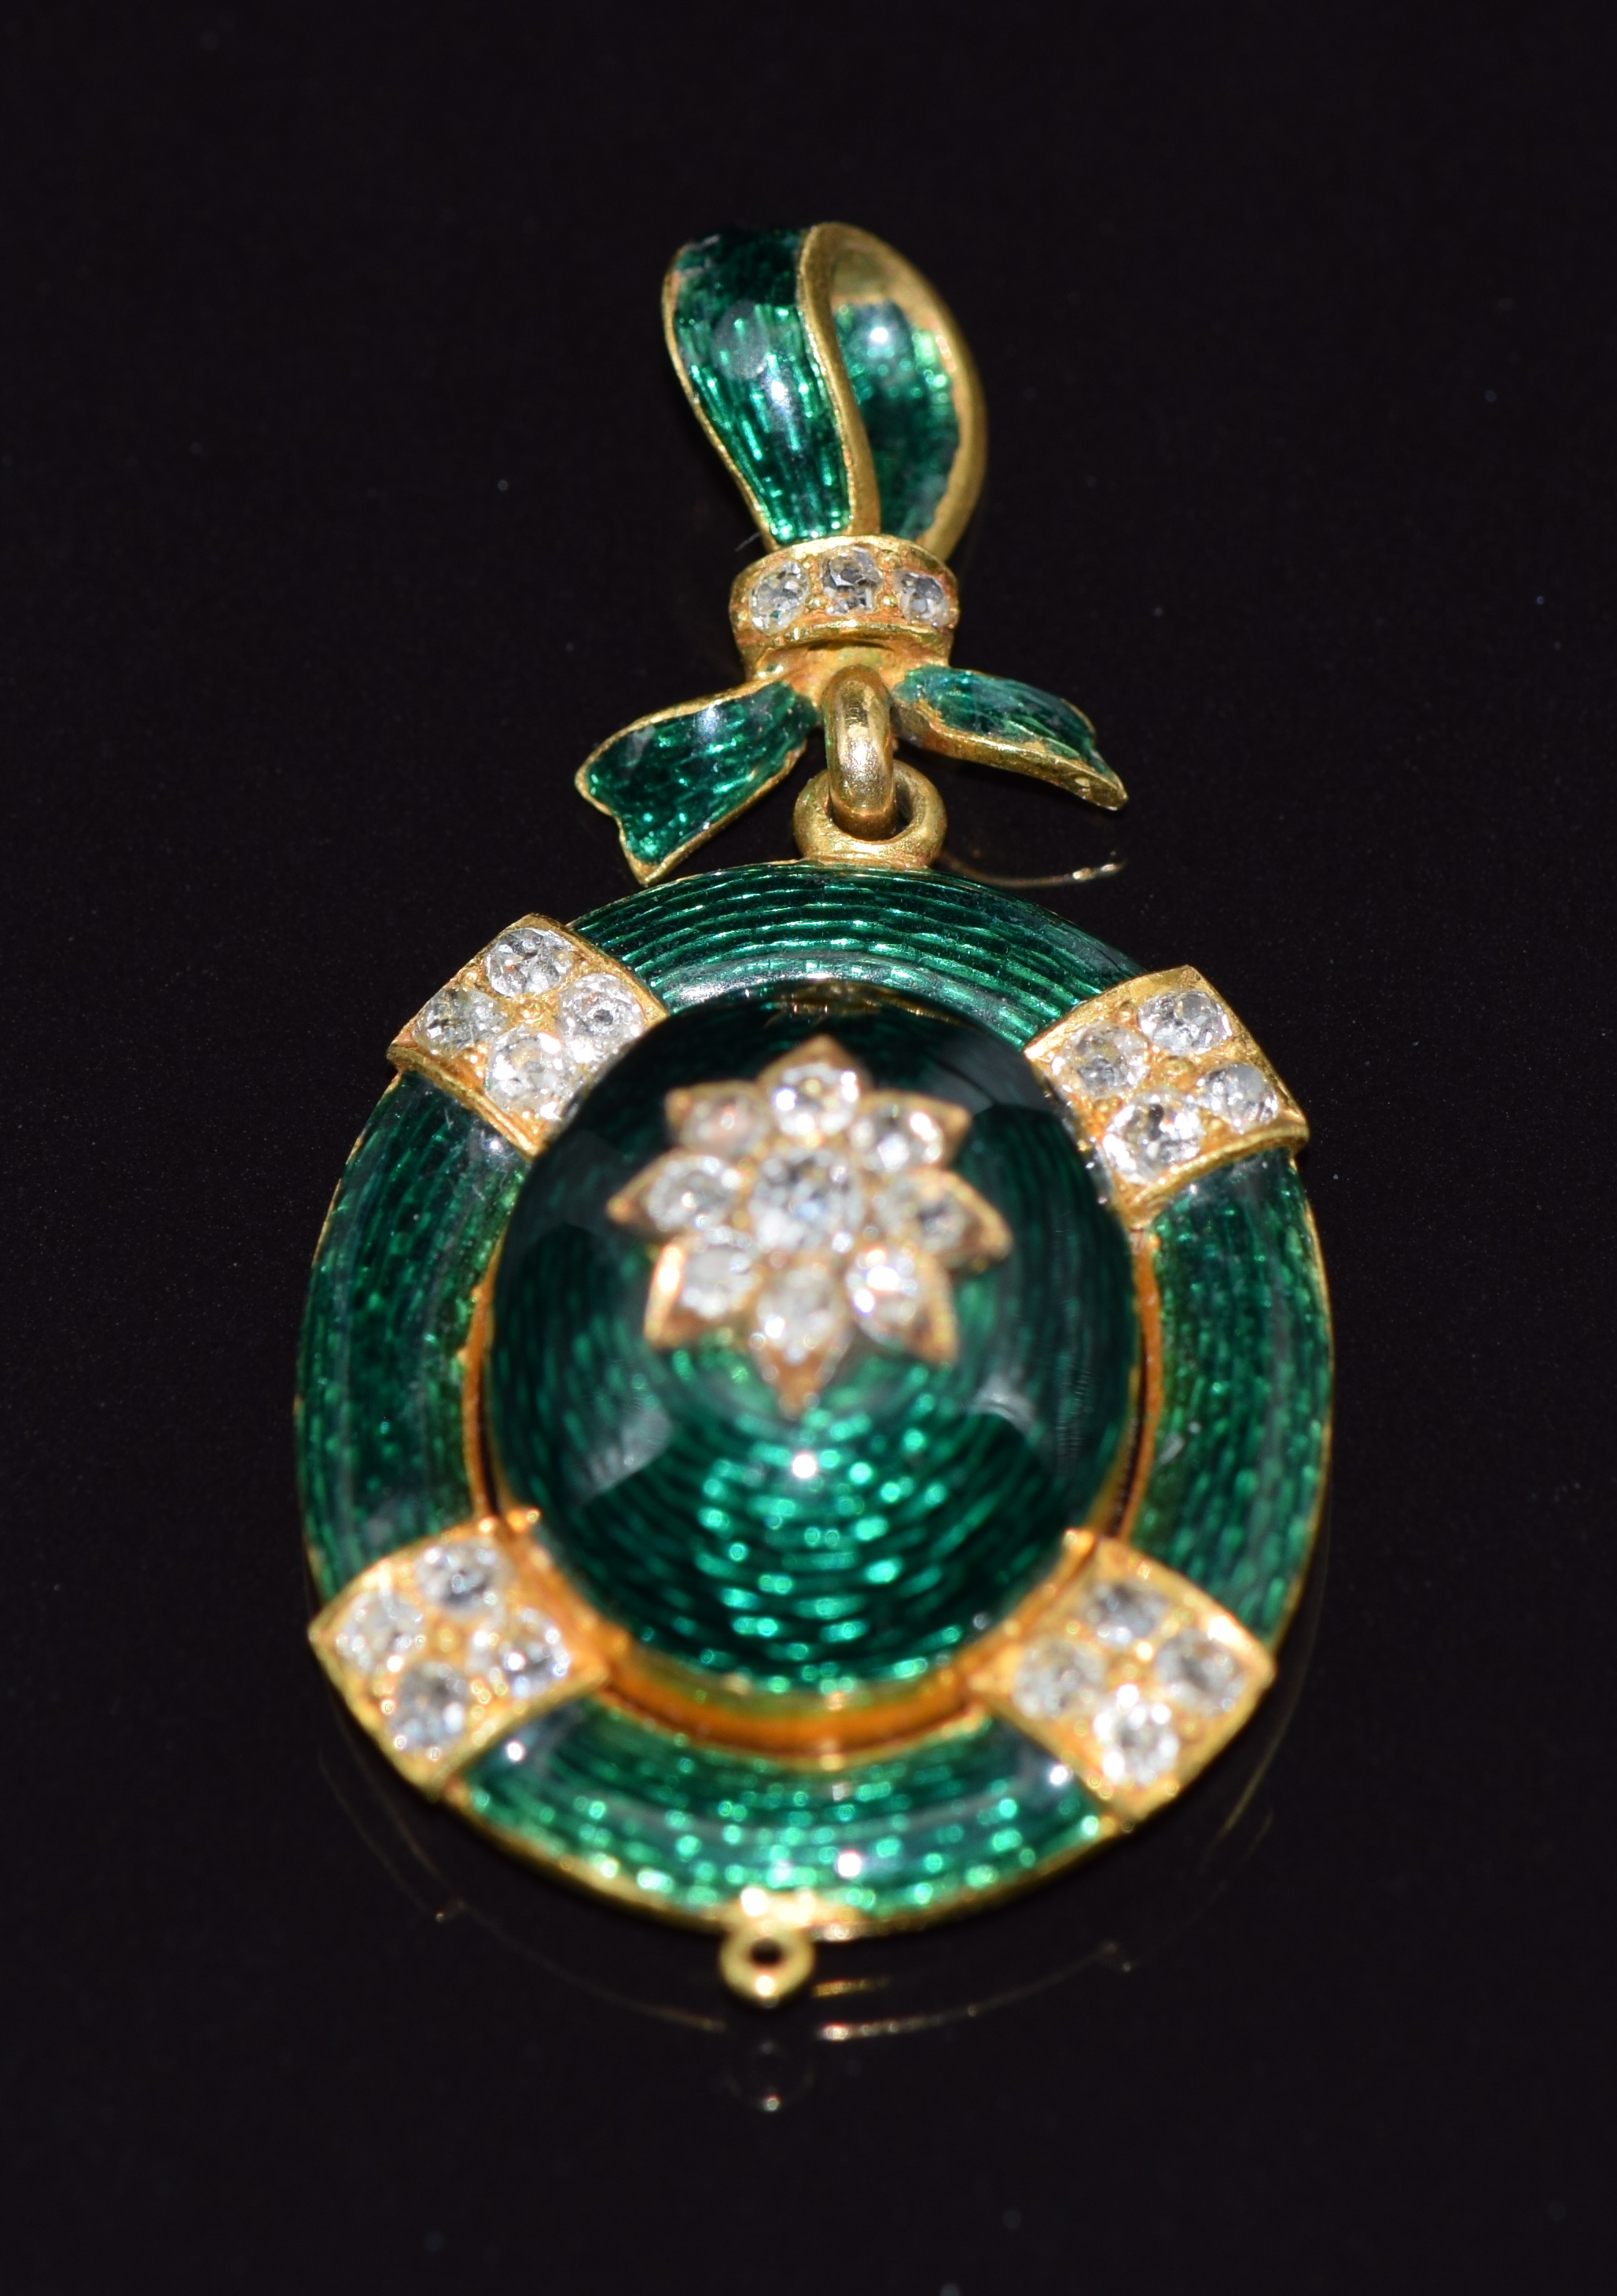 Victorian gold pendant/ locket set with green guilloché enamel and old cut diamonds, verso a glass - Image 2 of 3